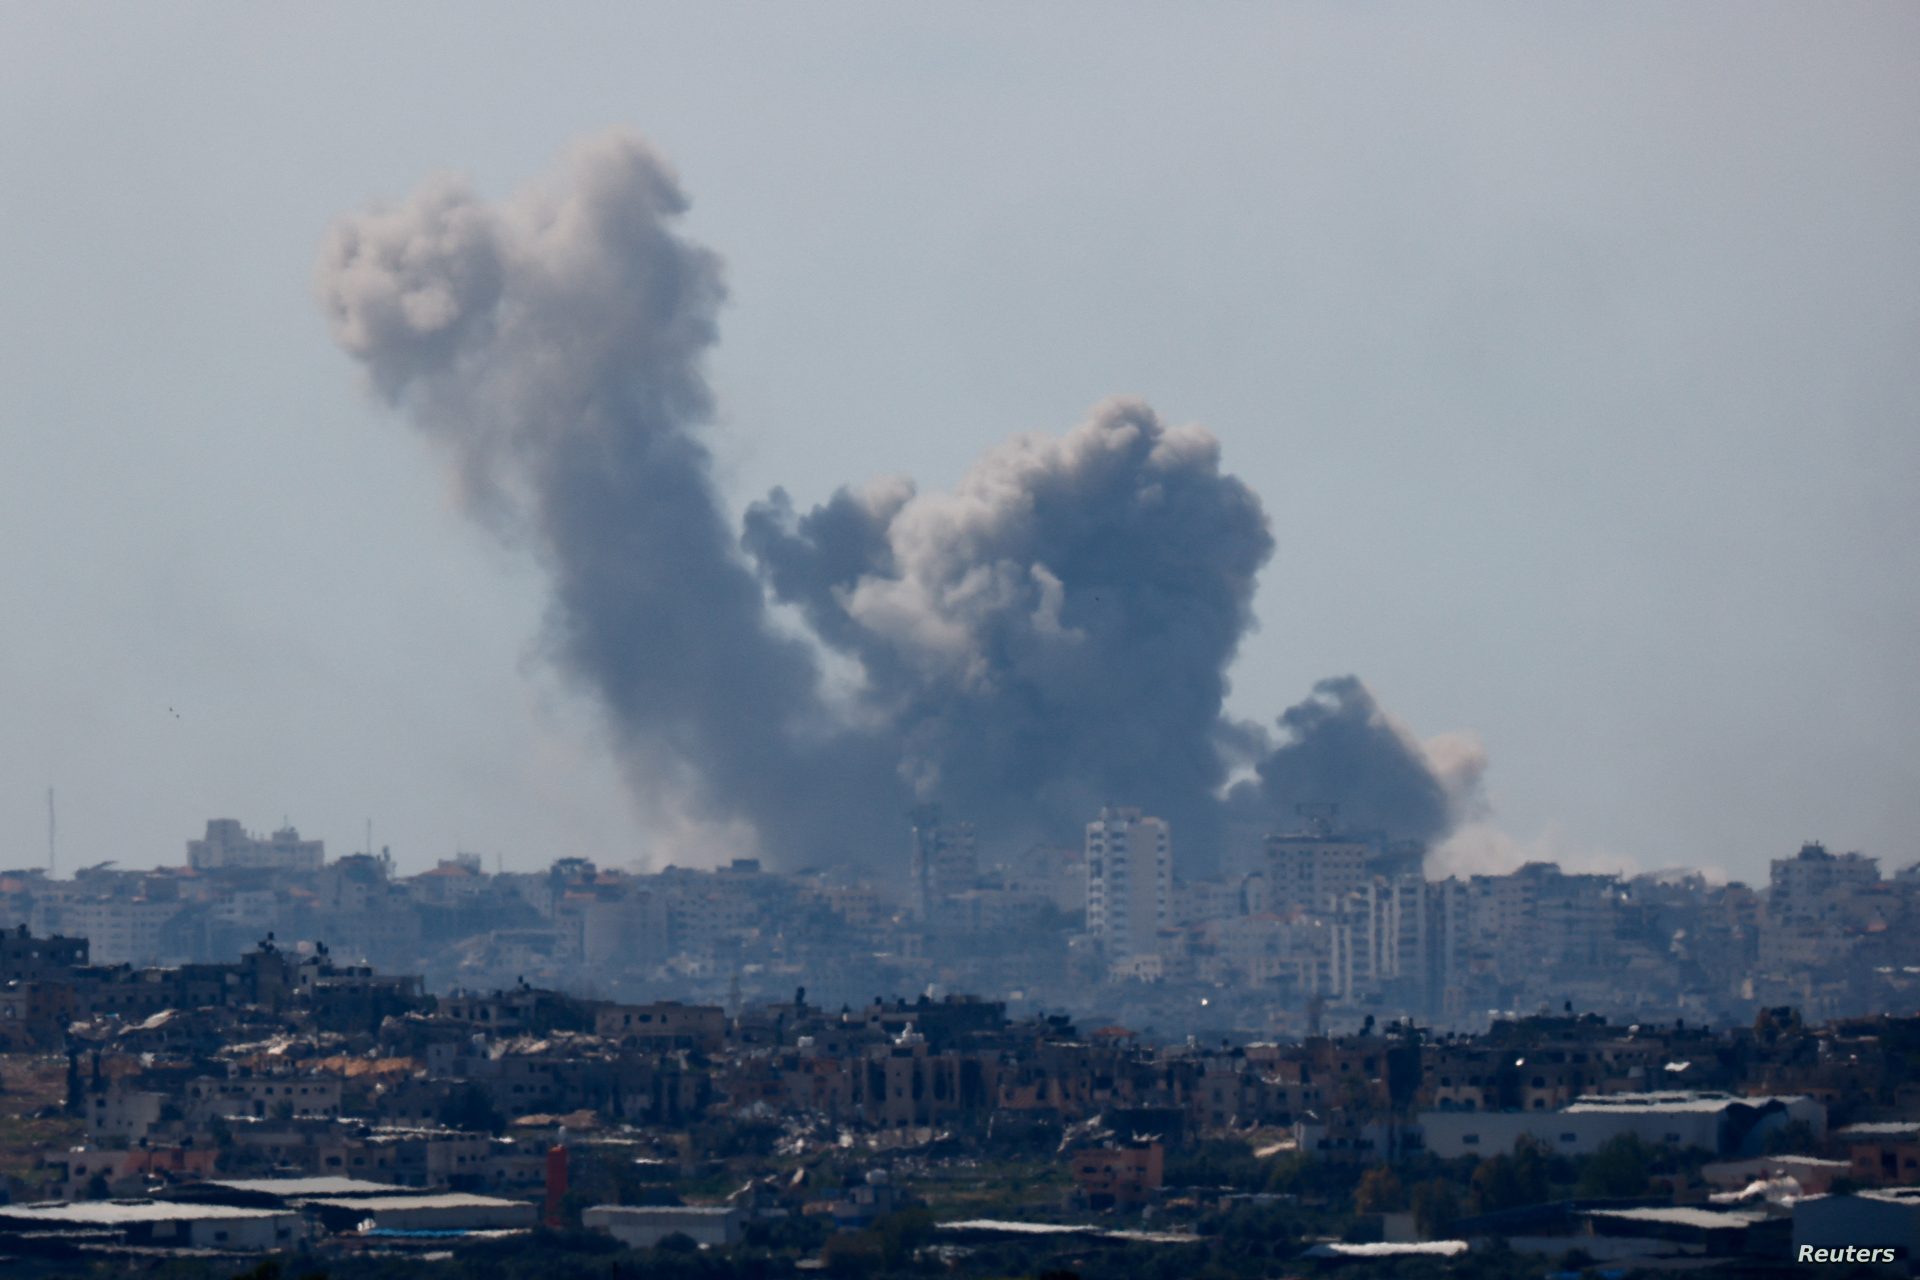 Smoke rises from Gaza during an explosion, as seen from Israel